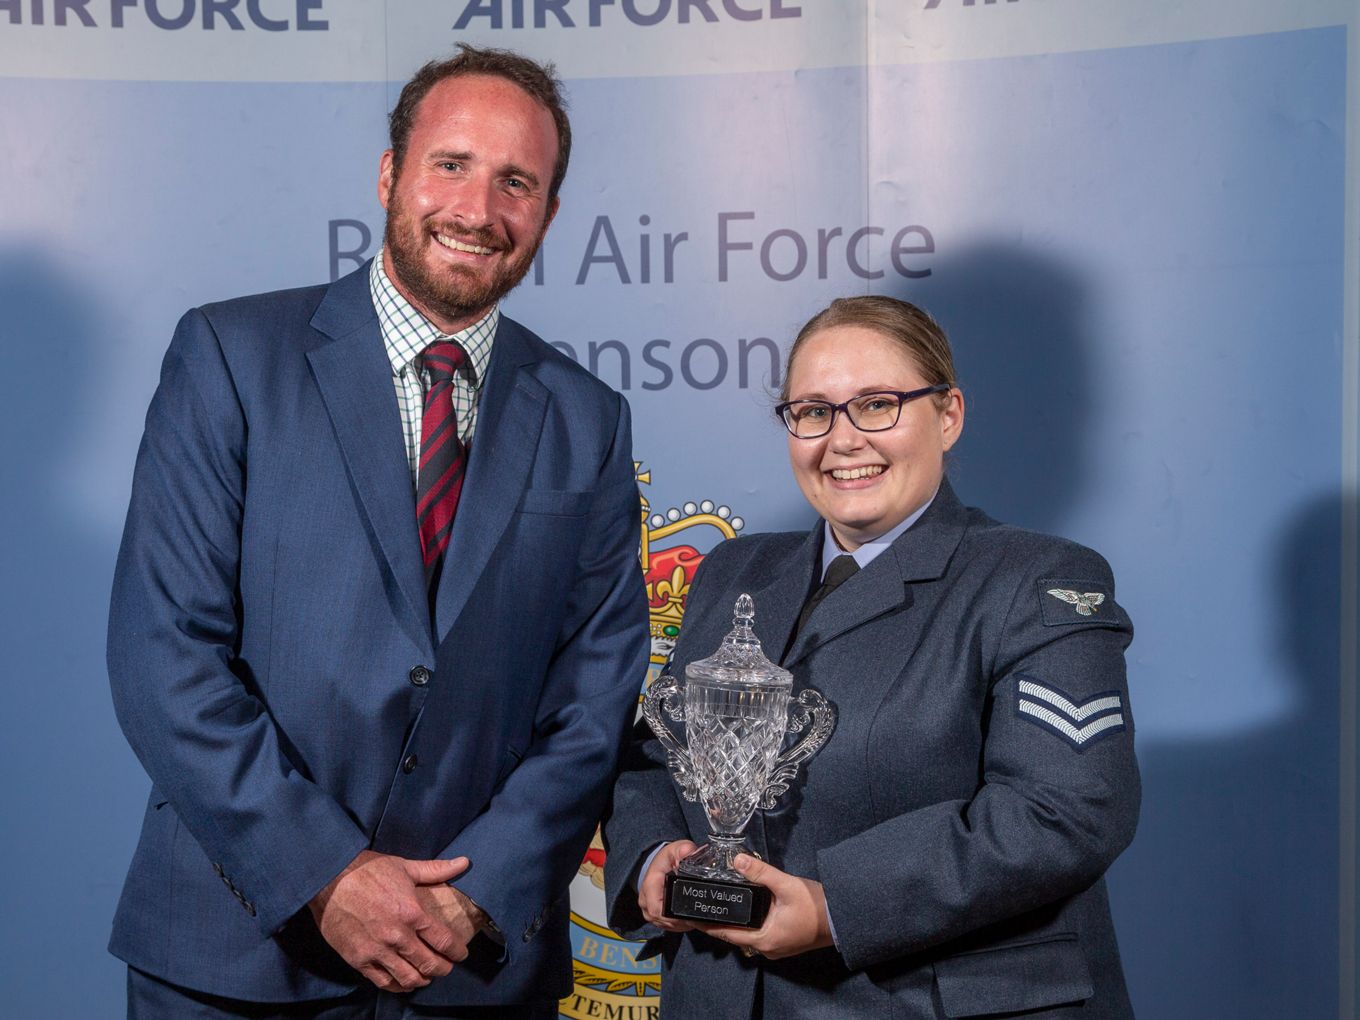 Cpl Kay is presented with her award